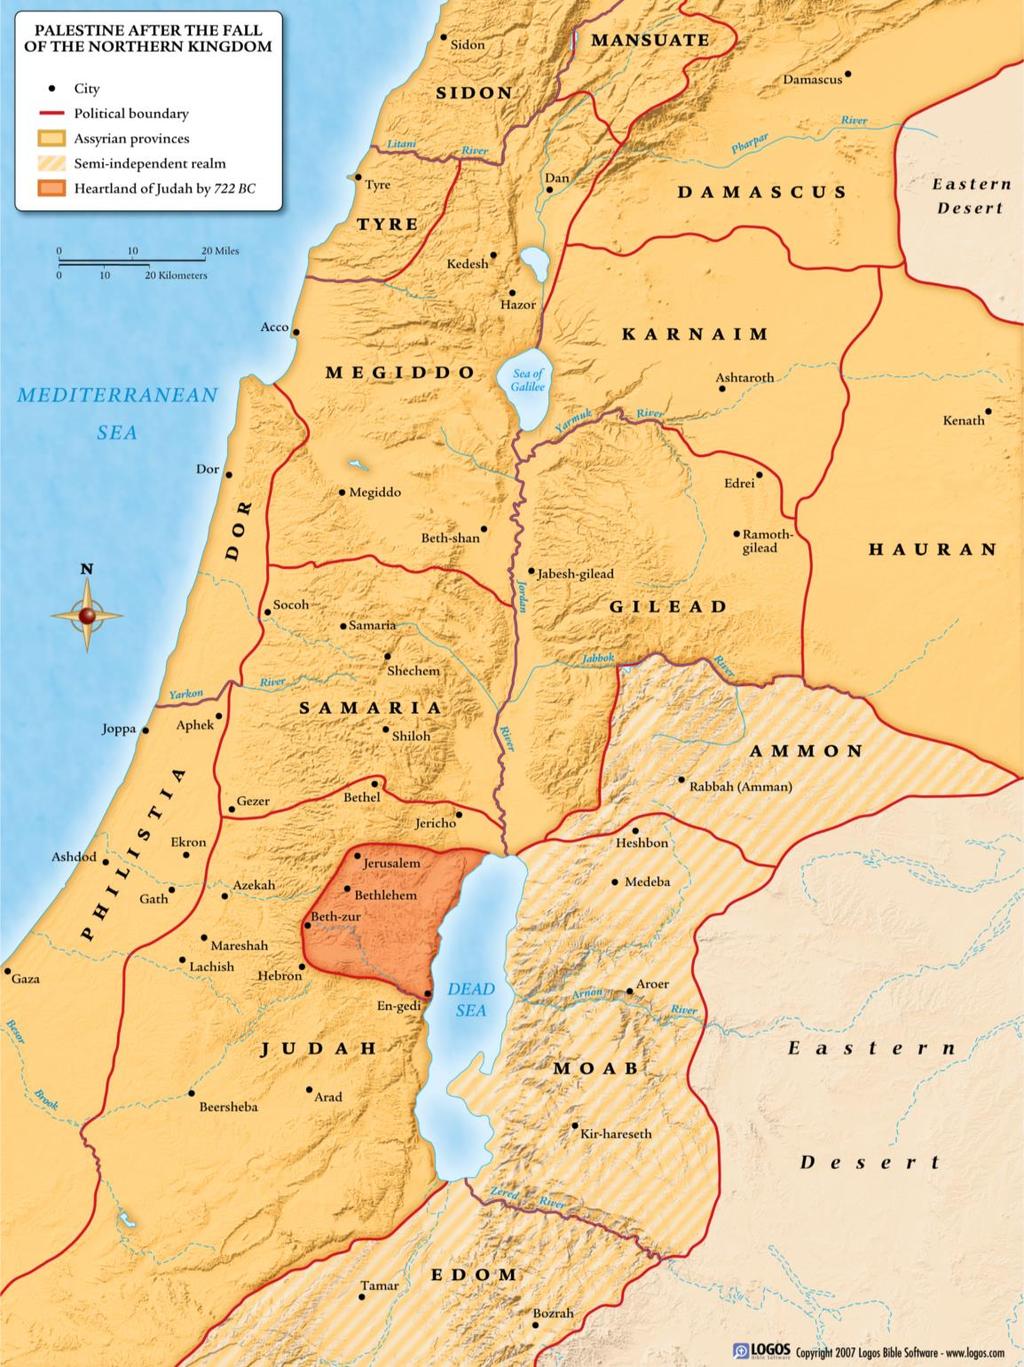 Ahaz made Judah a vassal state of the Assyrian Empire Once Israel was defeated in 722 BC, Judah was